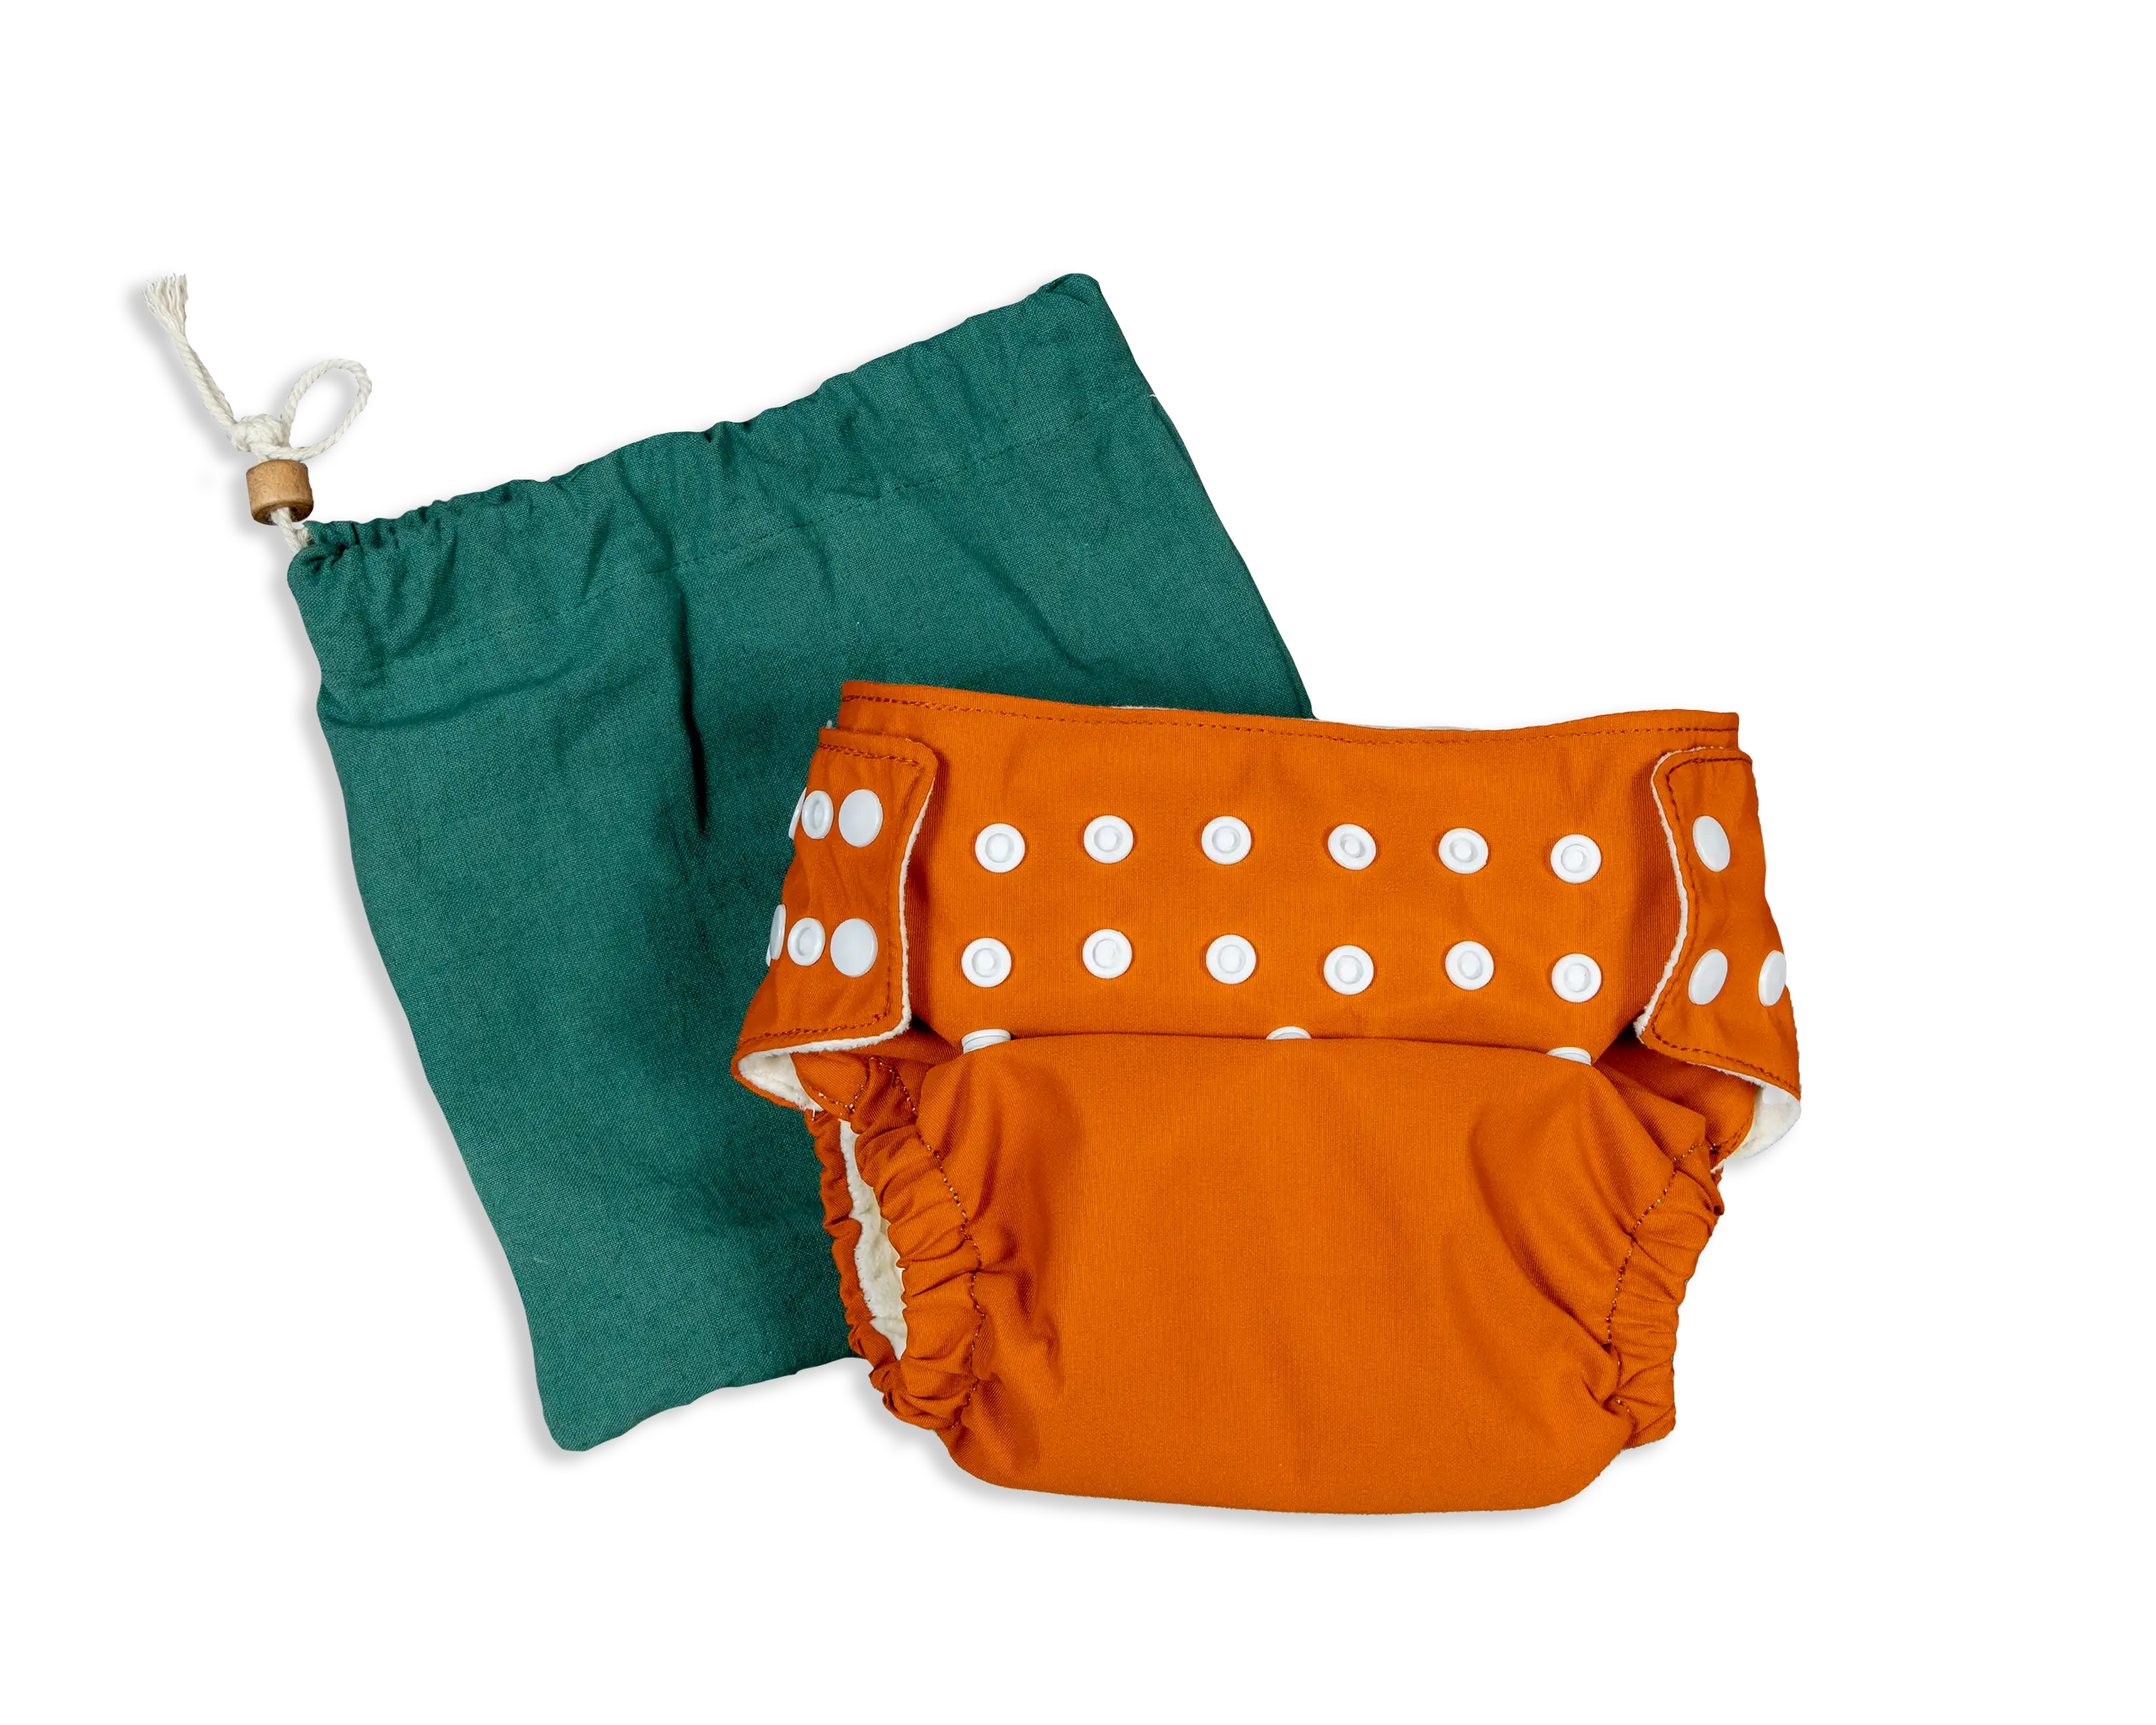 The Reusable Diaper is made with soft and breathable cotton, ensuring maximum comfort for your little one. Its adjustable snaps and flexible waistband make it easy to fit babies from 3 months to 3 years, growing with your child as they develop.